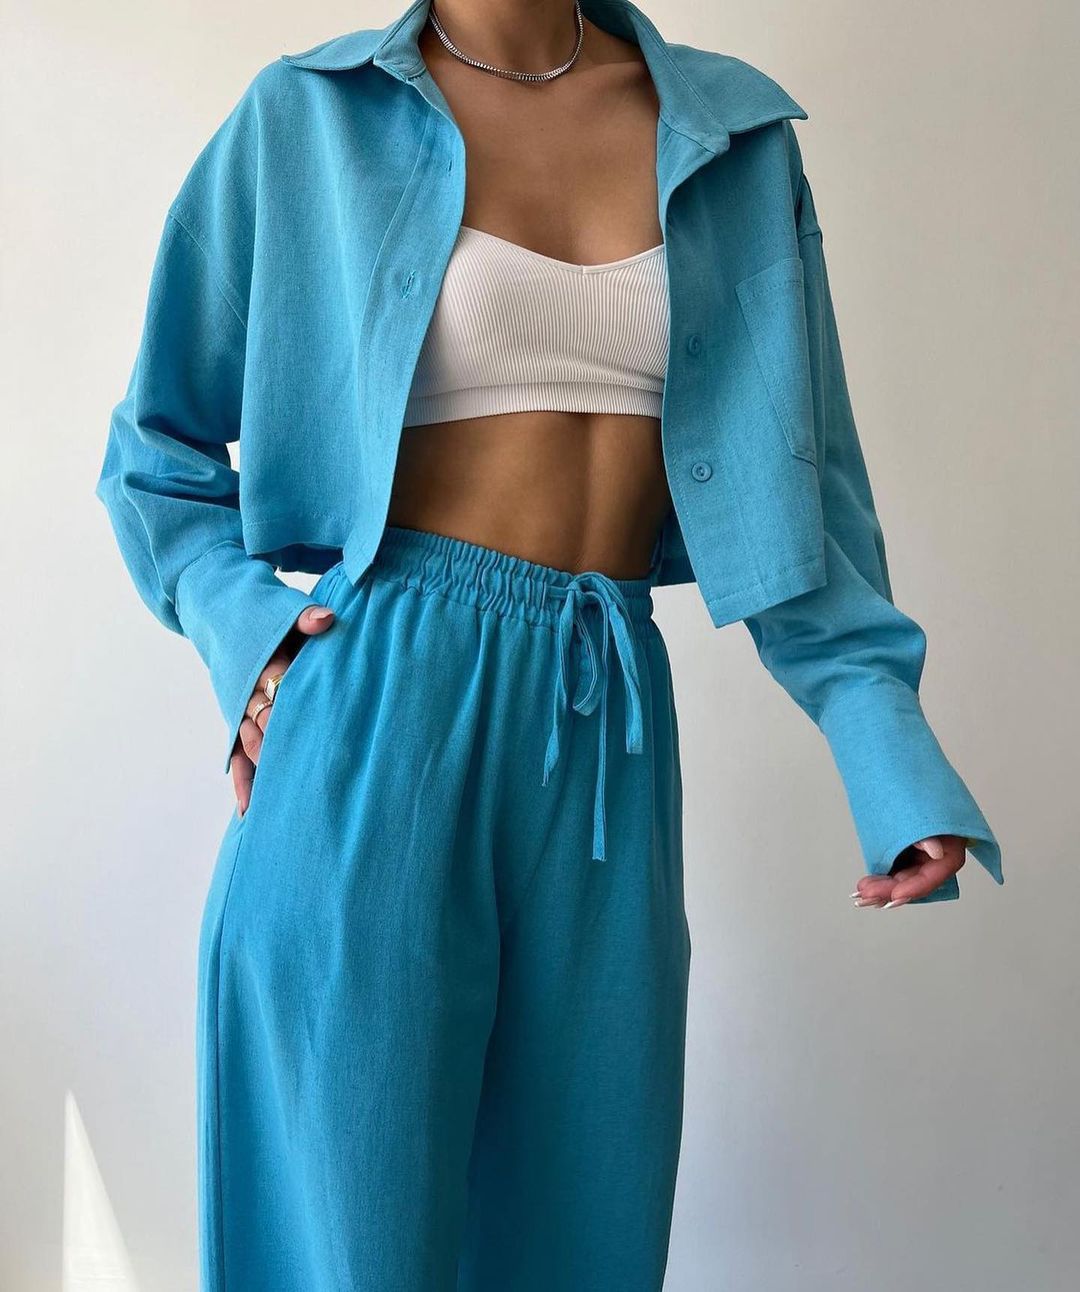 co-ord sets  | Women Two Piece Outfits For Women Long Sleeve Button Down Wide Leg Loungewear Pajama Set | [option1] |  [option2]| thecurvestory.myshopify.com